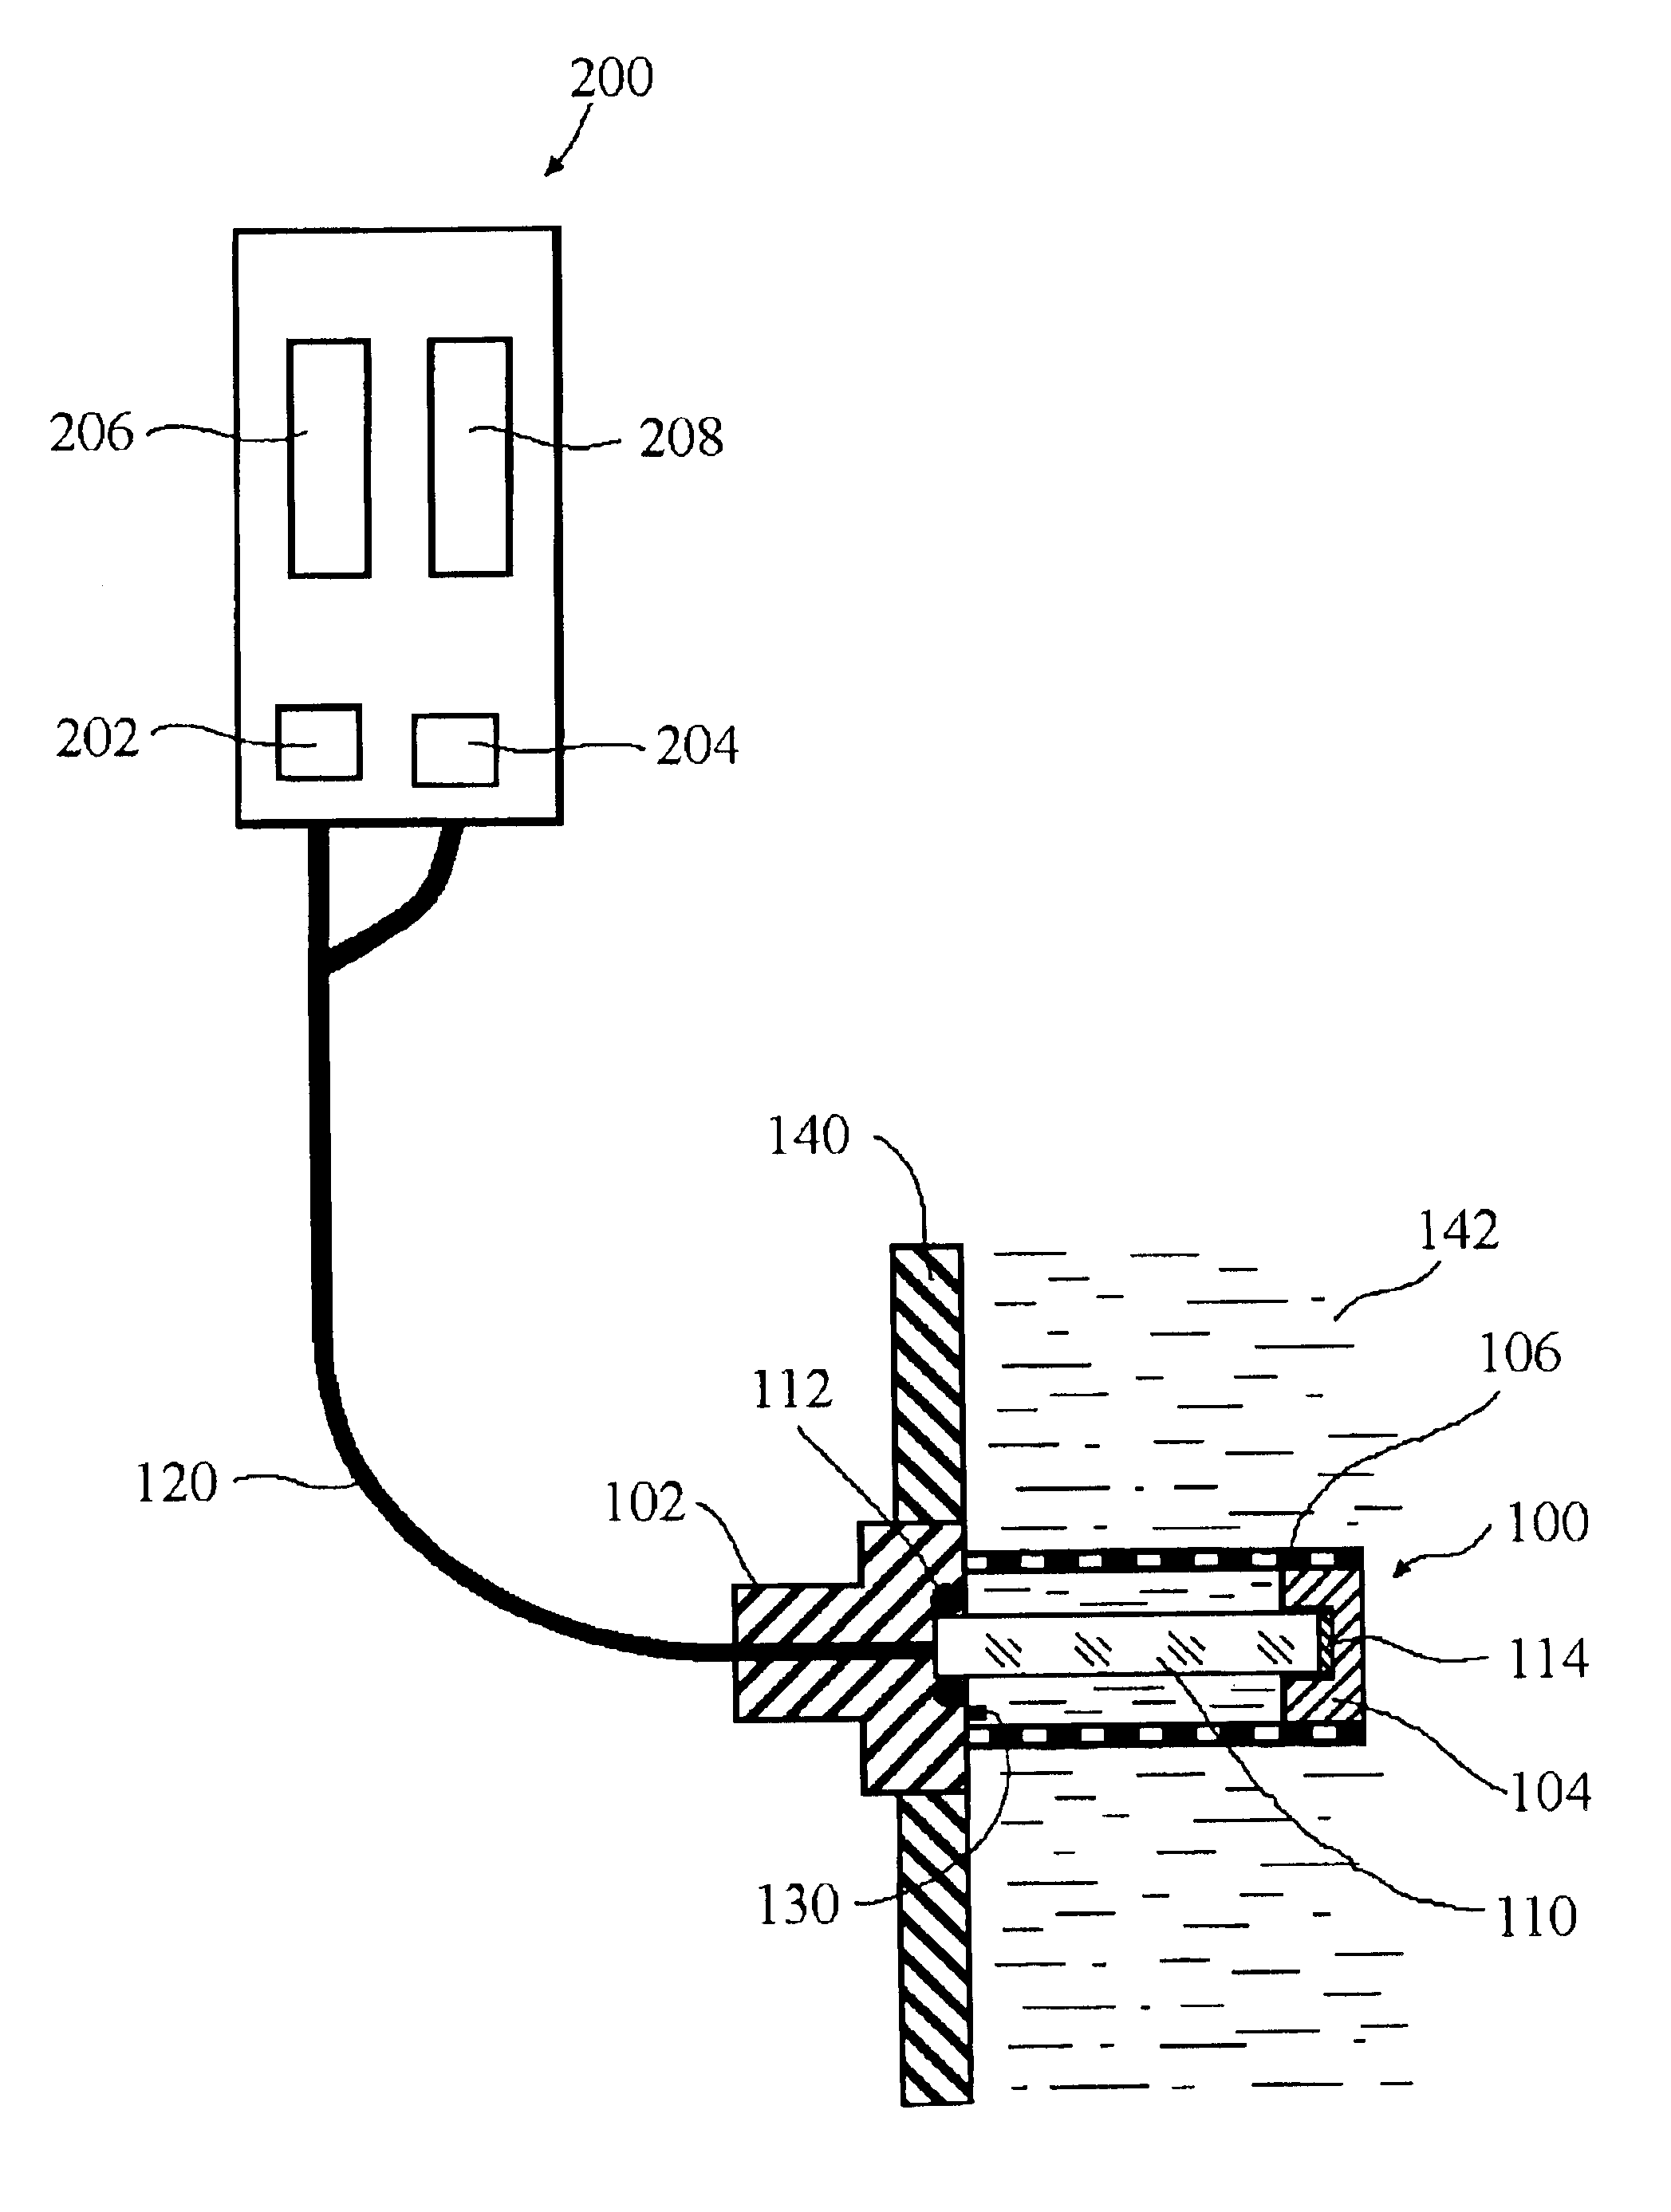 Apparatus for measuring soot content in diesel engine oil in real time